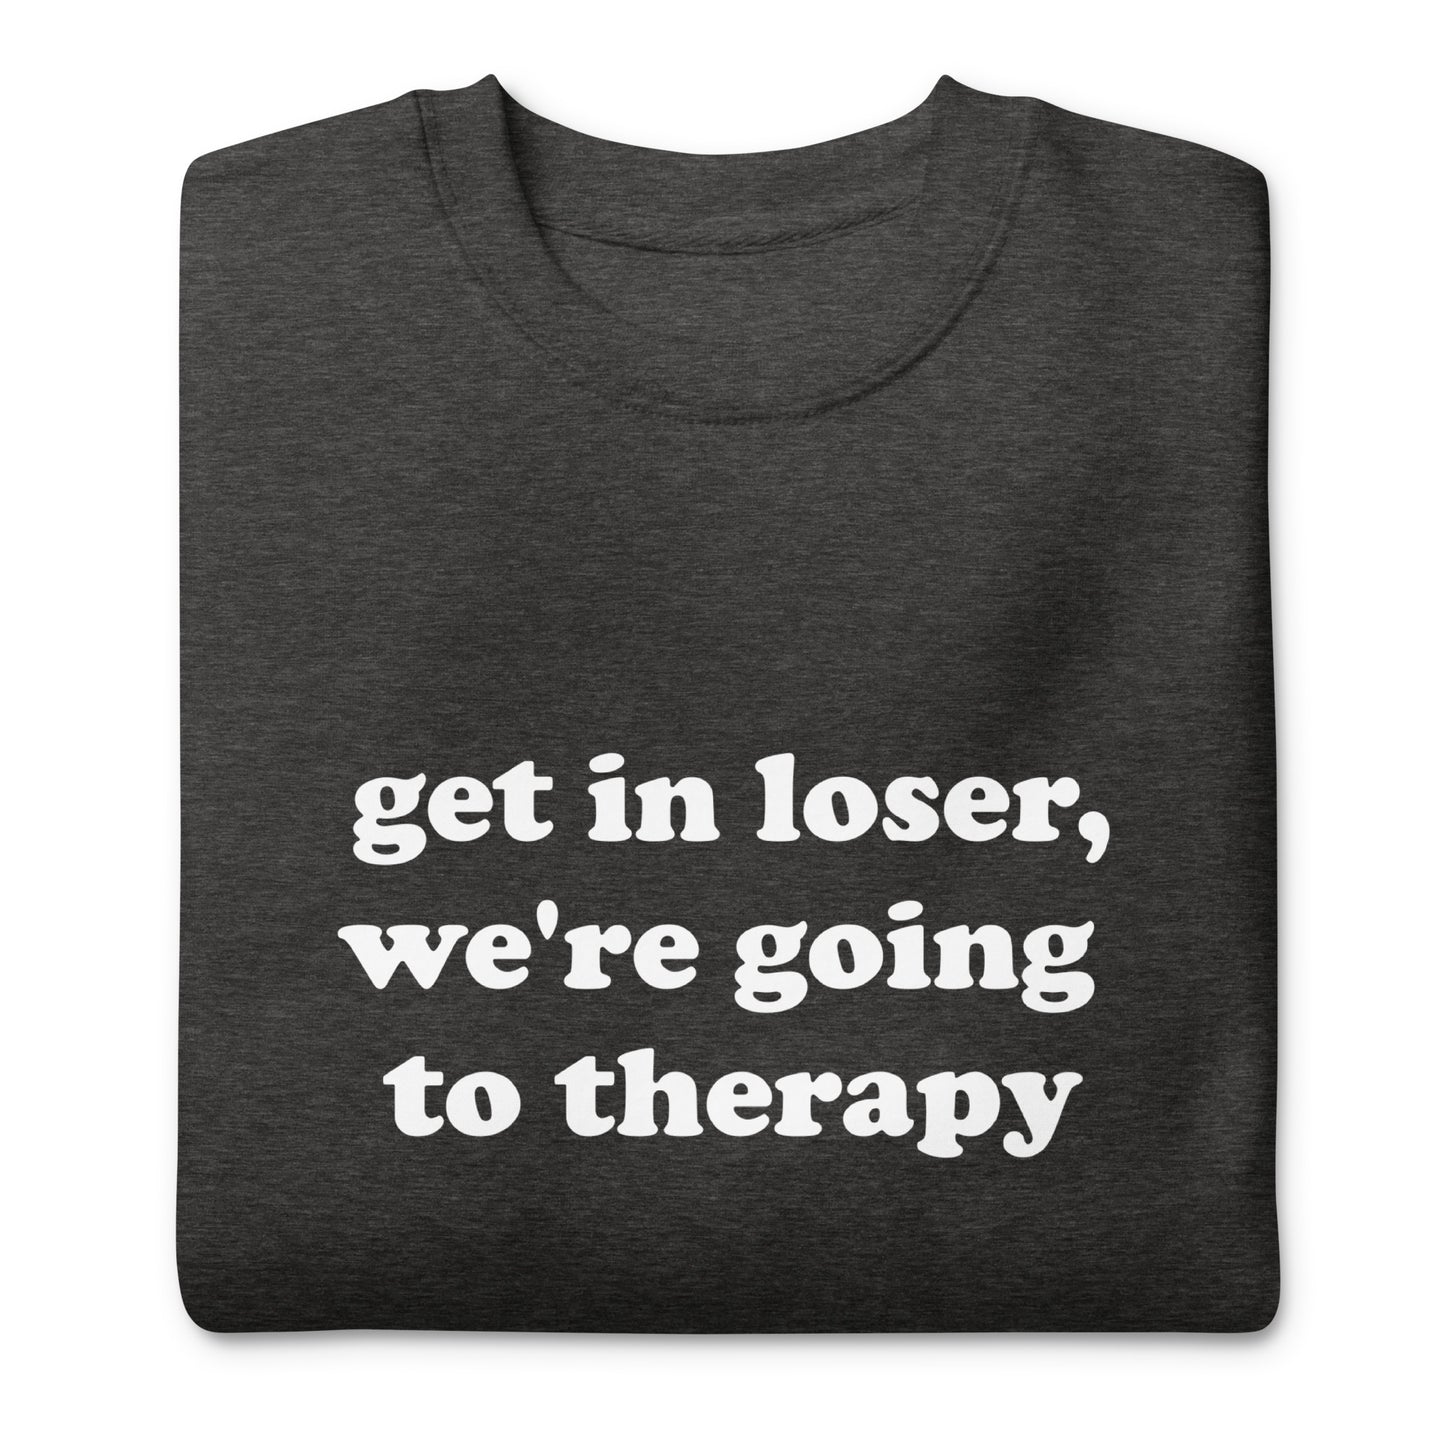 Get In Loser, We're Going to Therapy Sweatshirt